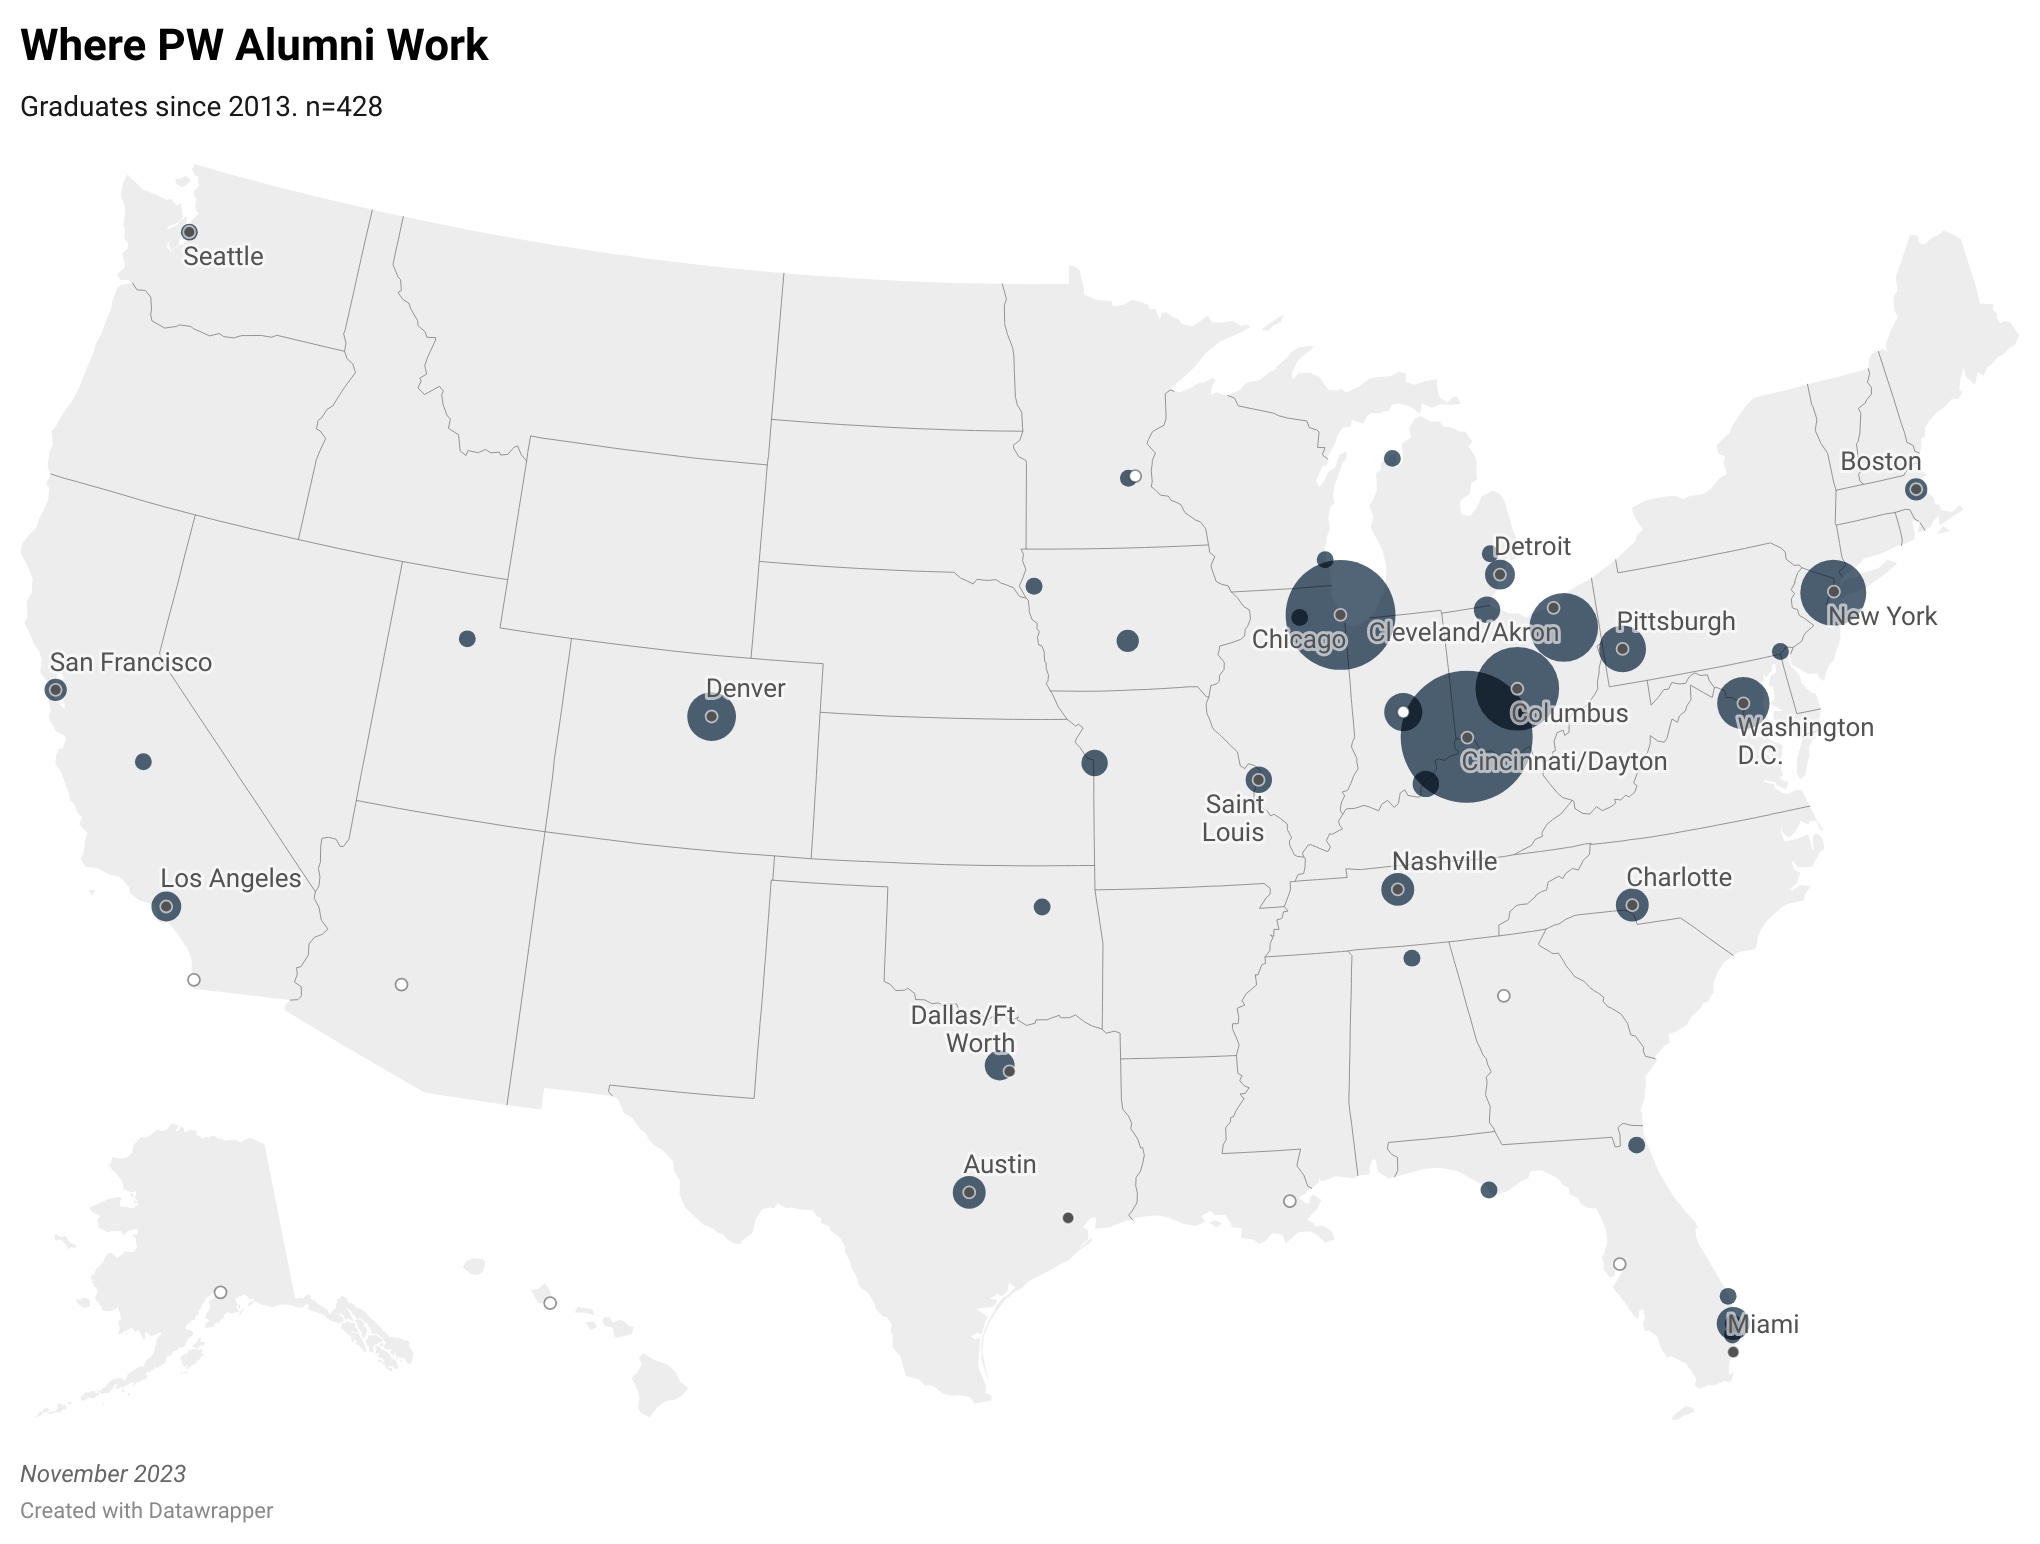 Map of the United States showing cities where PW majors are employed. Most graduates are in the Midwest: Cincinnati, Columbus, Cleveland, Chicago. But graduates are employed all over the country—Boston, New York, Washington DC, Austin TX, Denver, San Francisco.